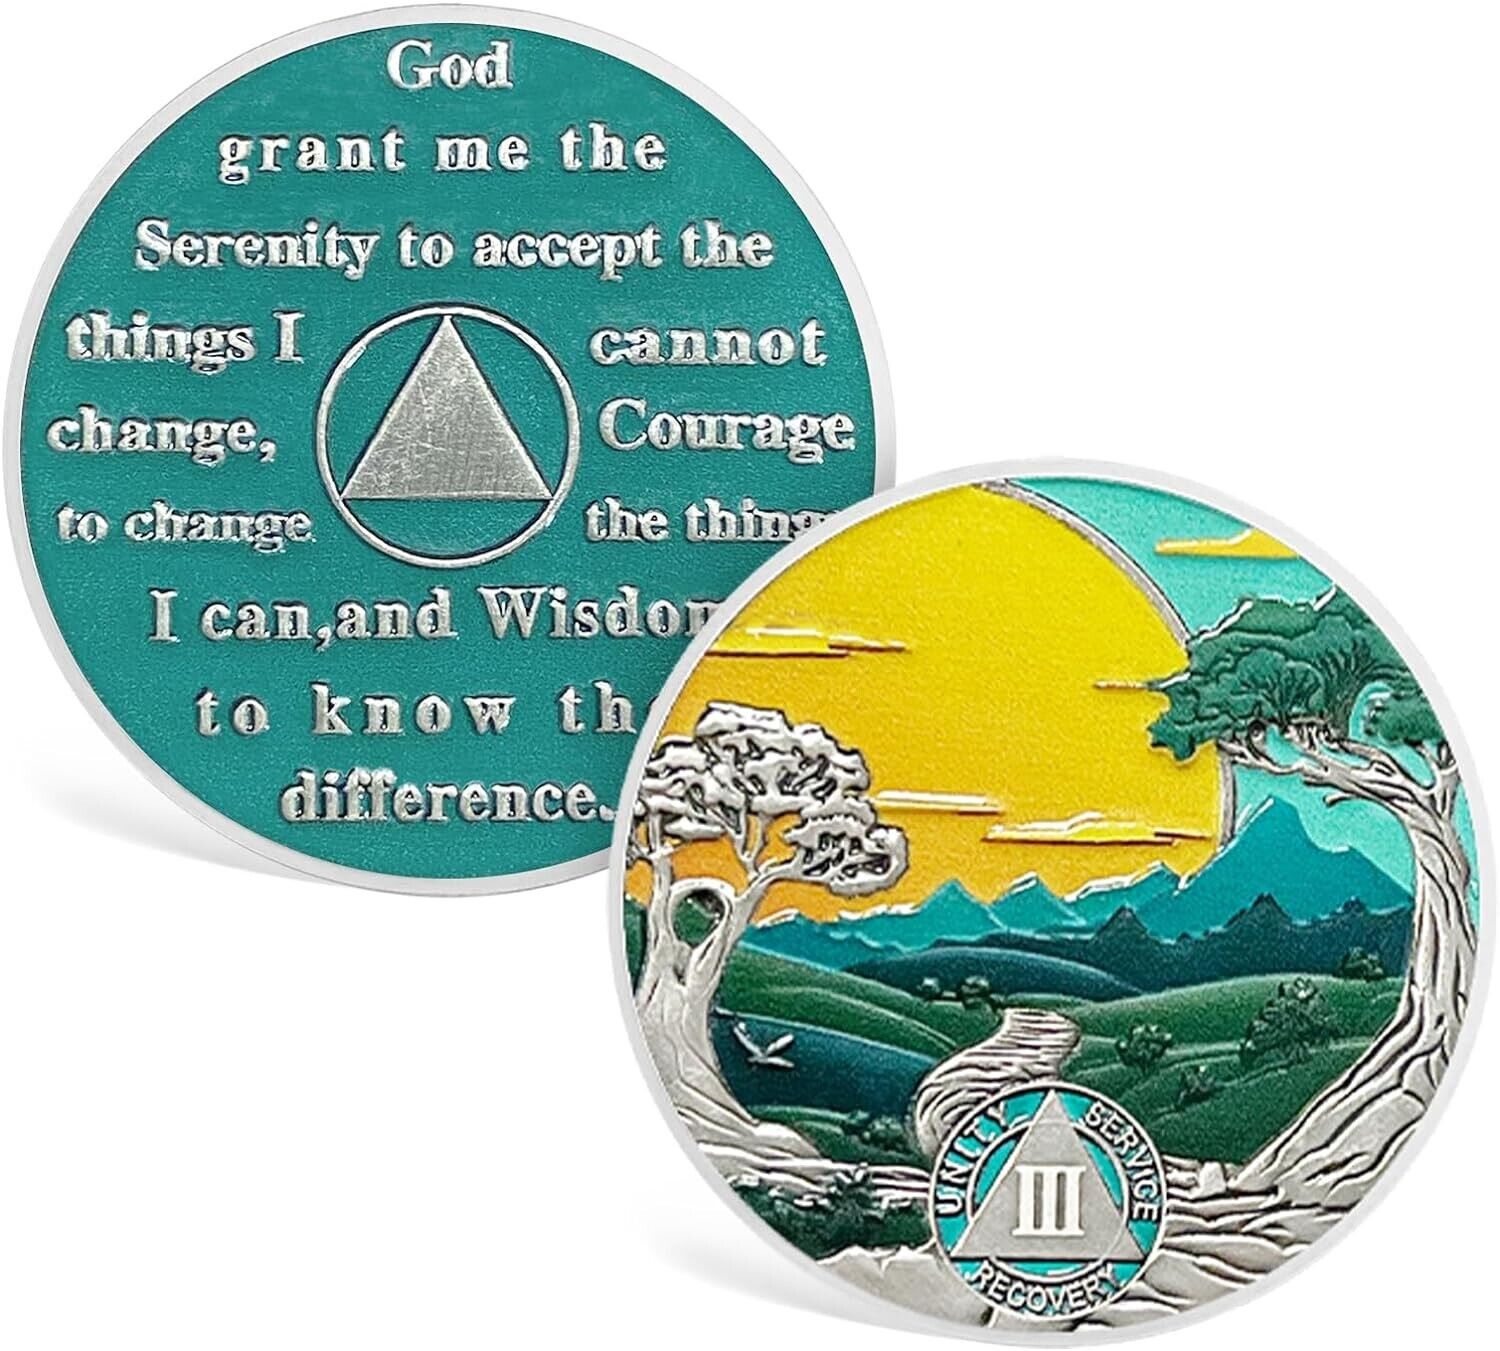 3 Year Sobriety Chip Sobriety Coin Sobriety Gifts AA Recovery Medallions Gifts